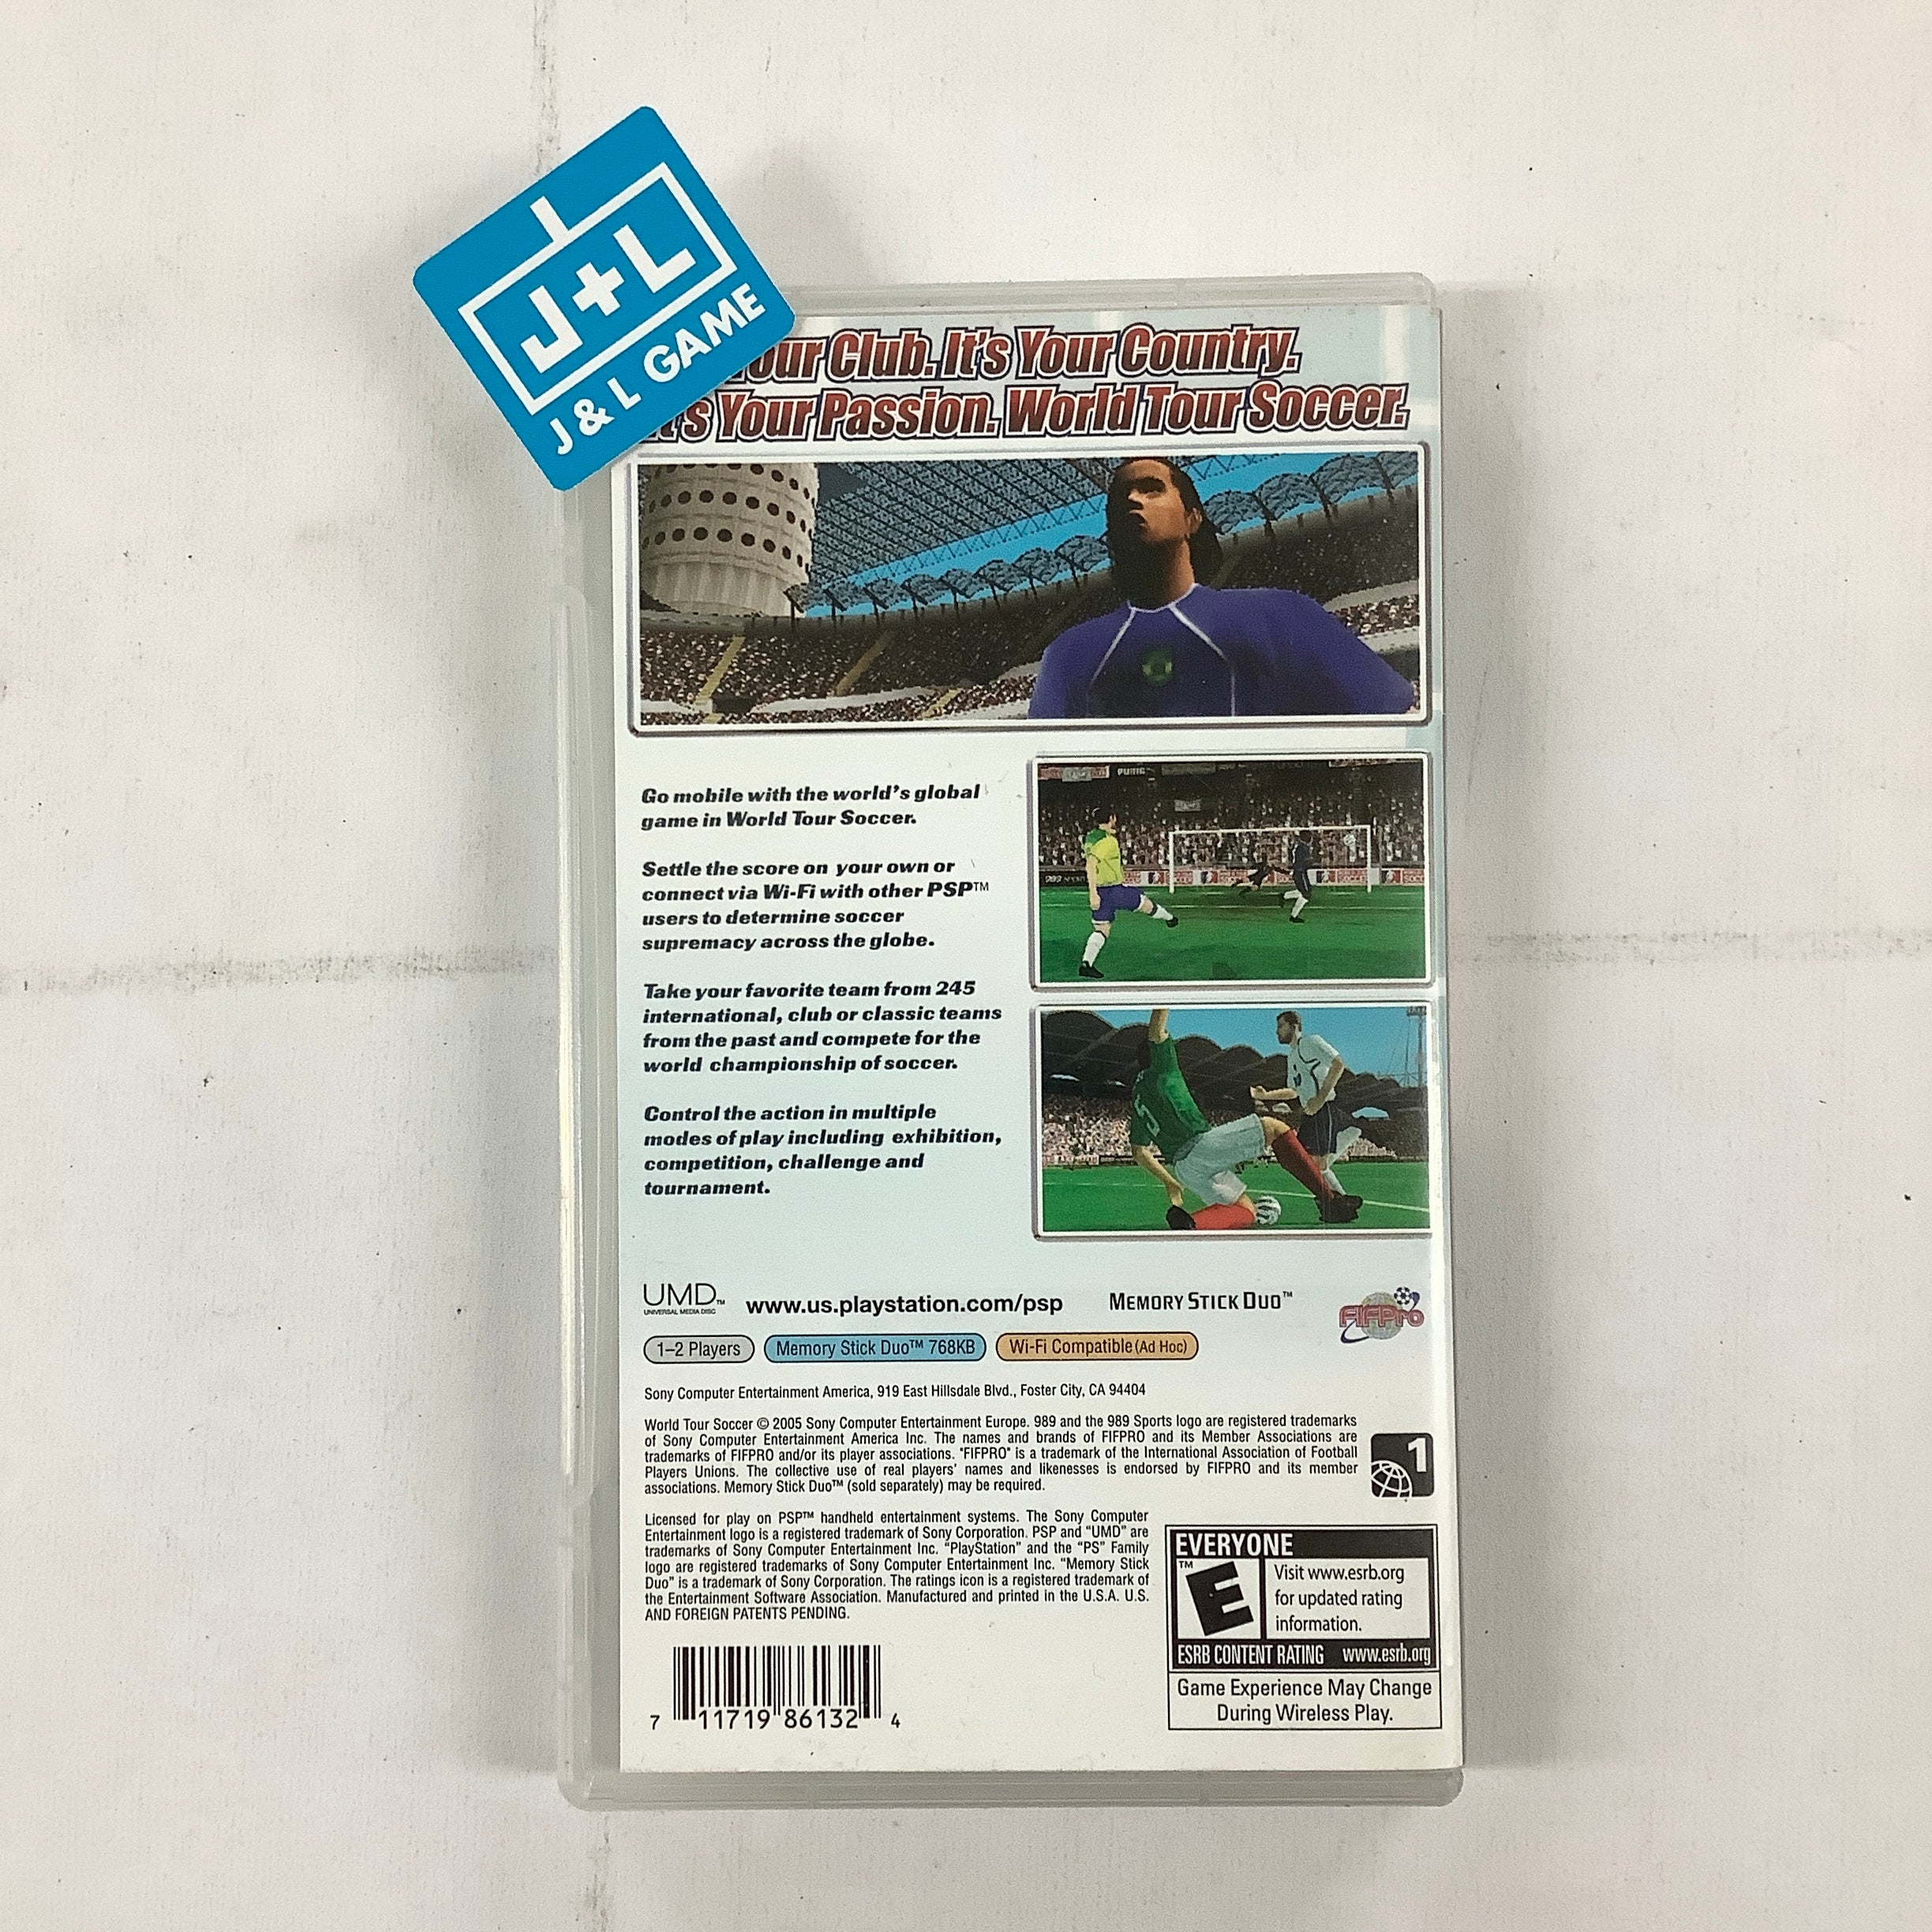 World Tour Soccer - Sony PSP [Pre-Owned] Video Games SCEA   